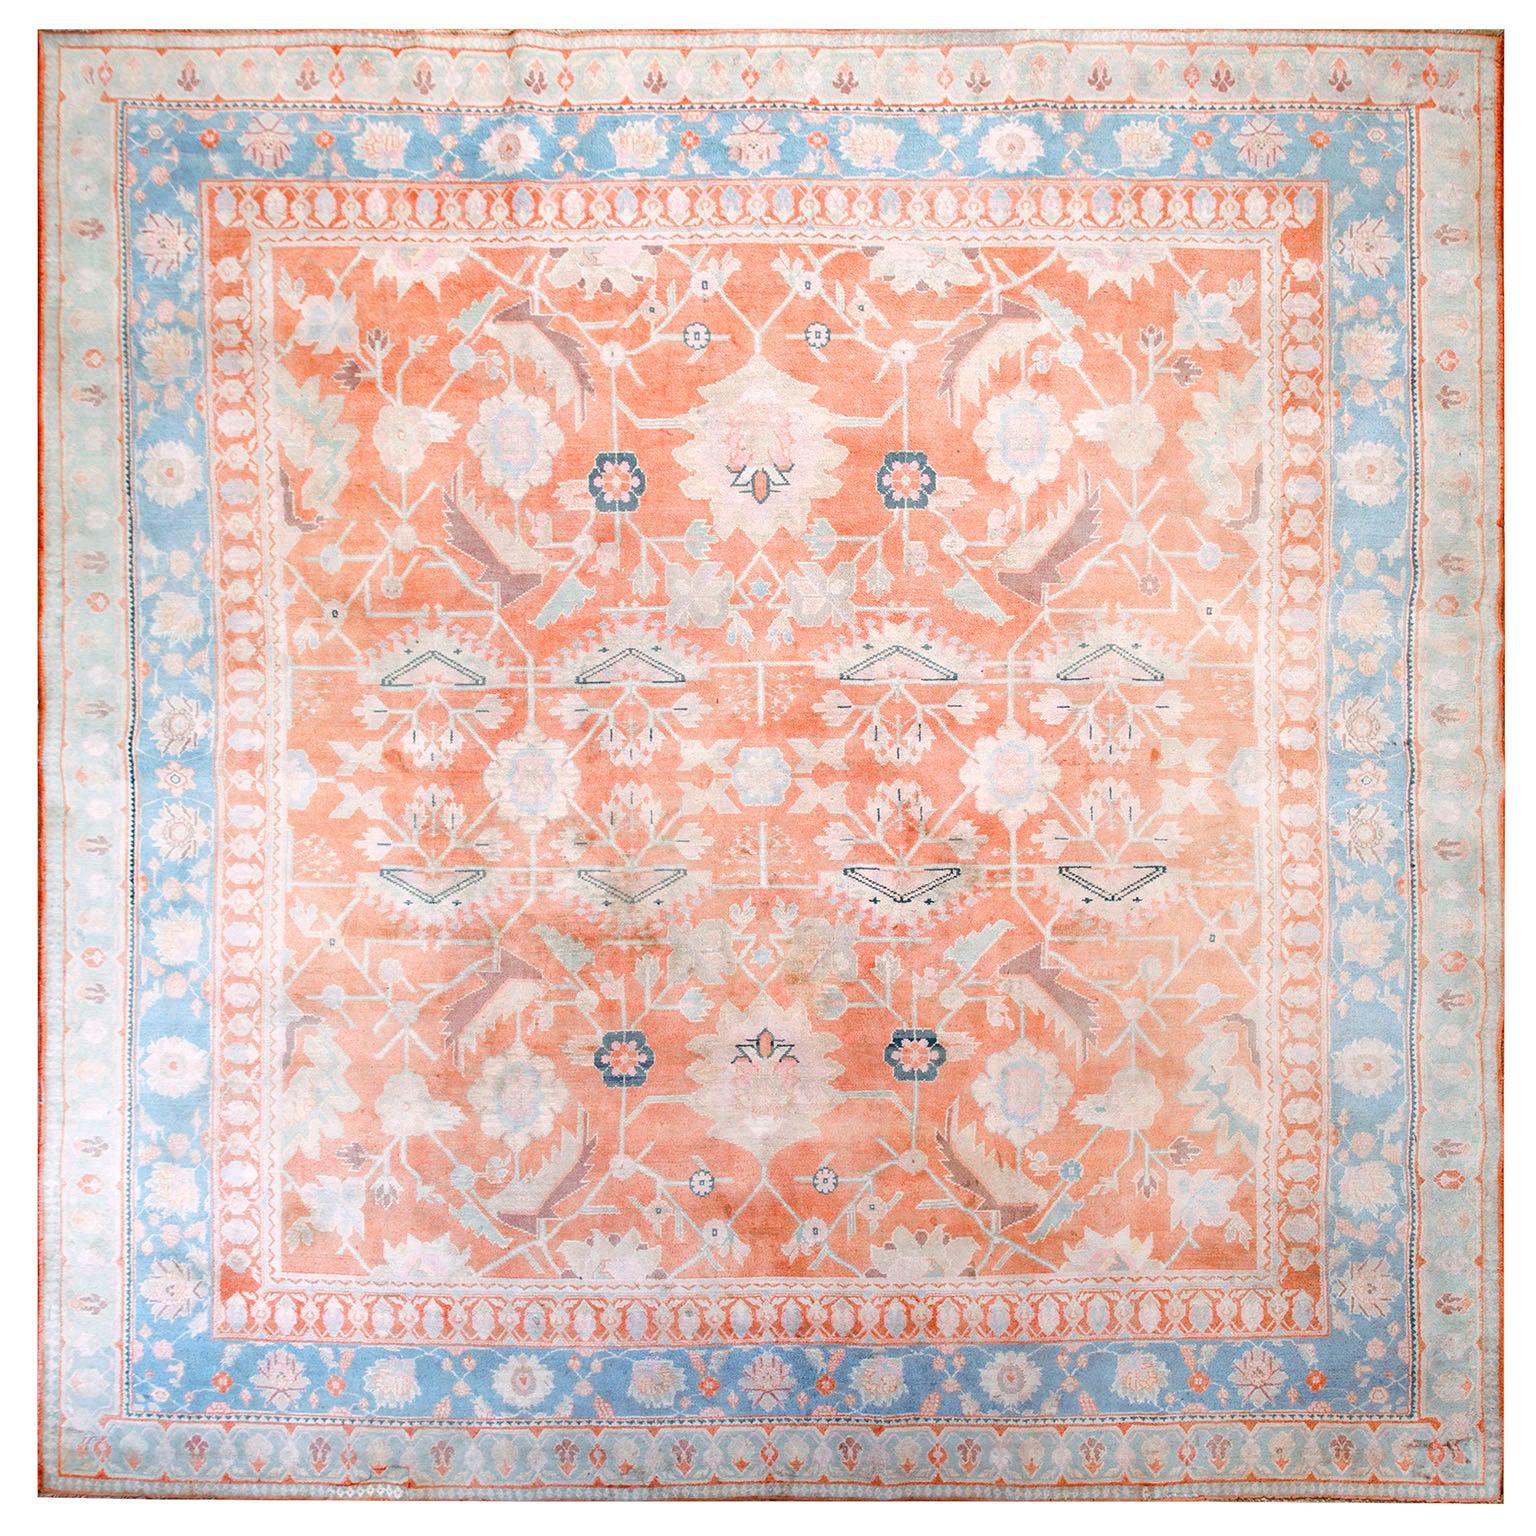 Early 20th Century Indian Cotton Agra Carpet ( 12' x 12' - 365 x 365 ) For Sale